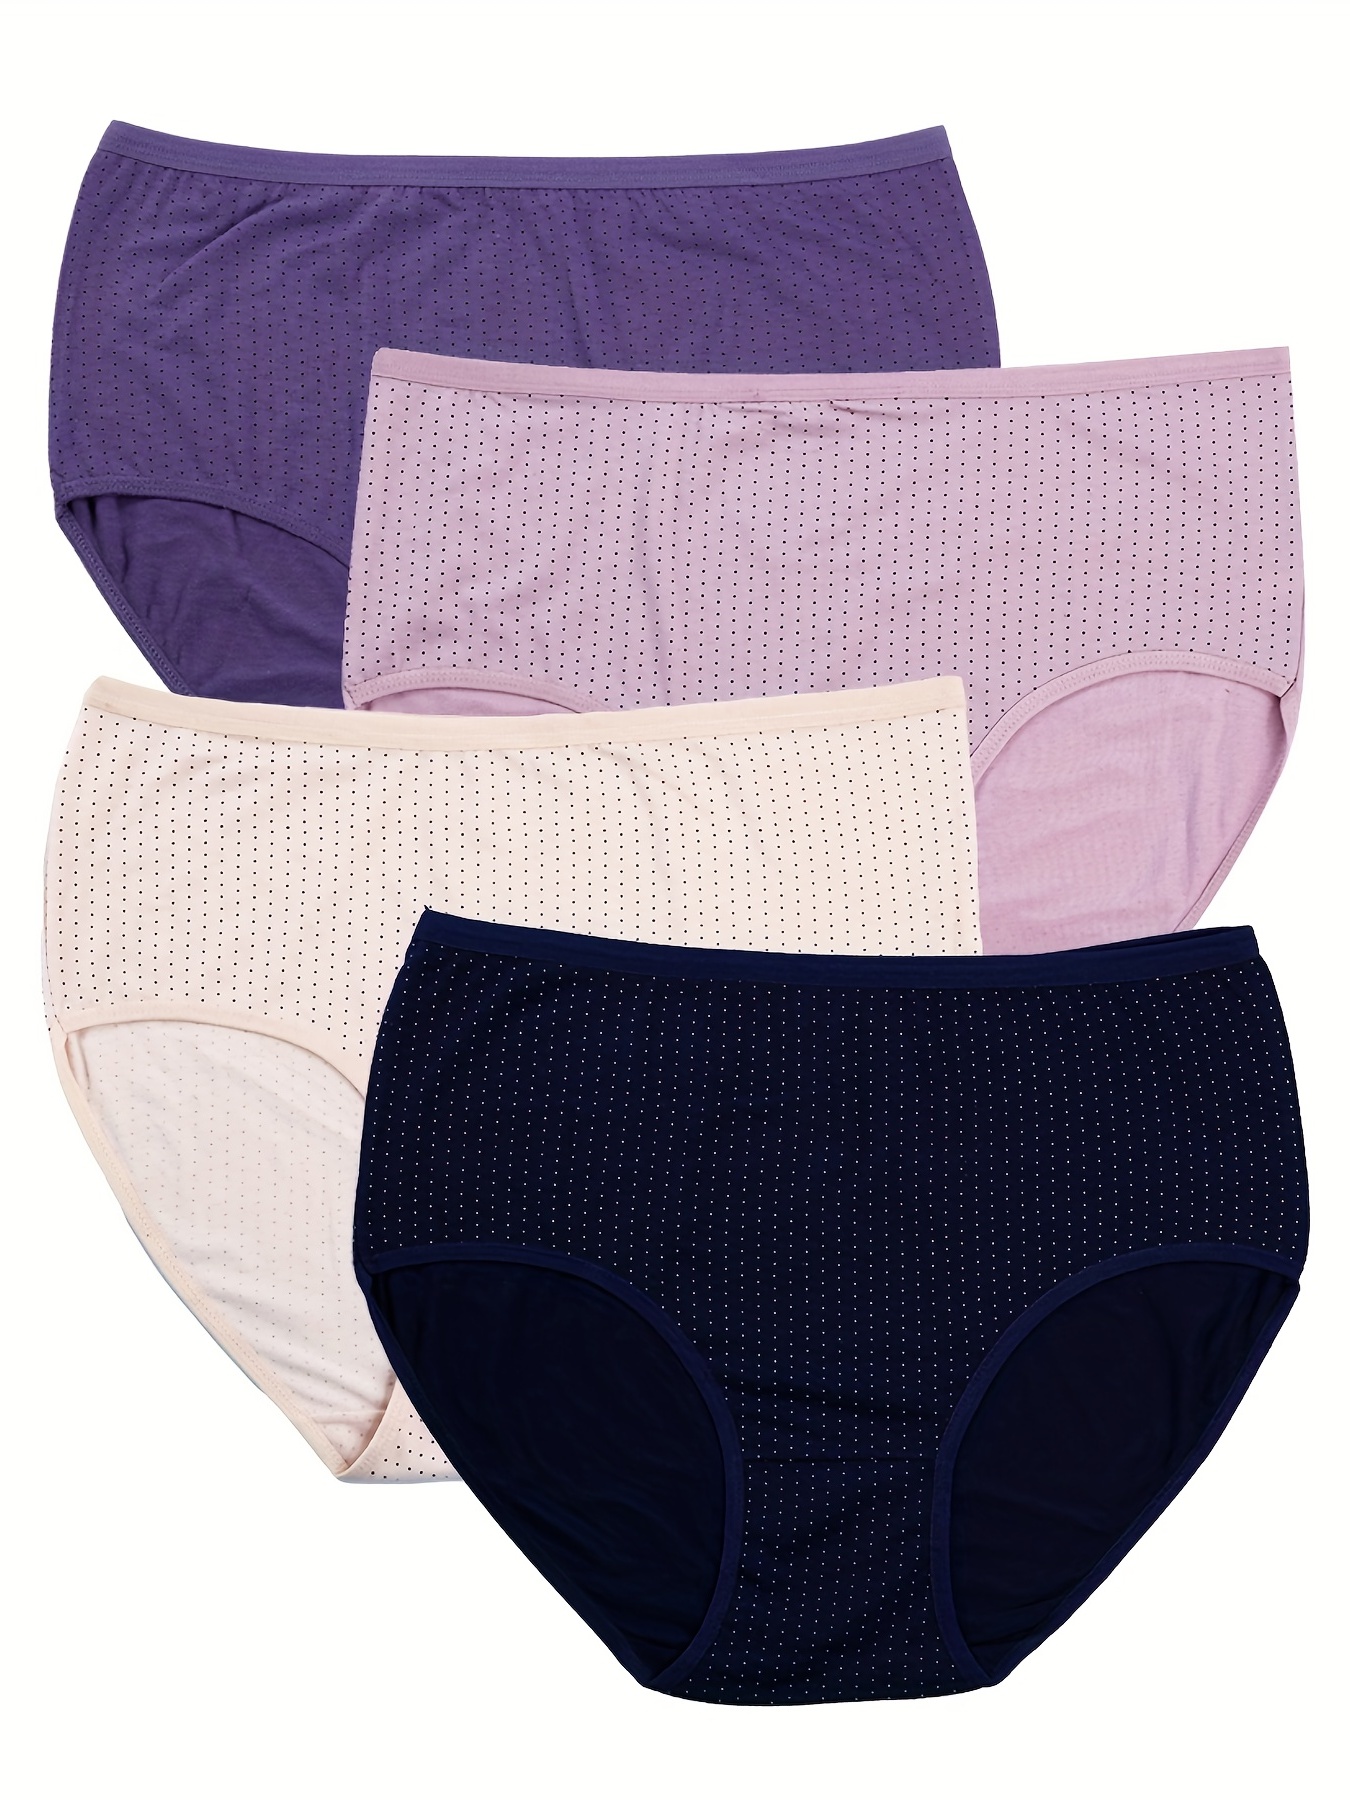 wirarpa Women's Cotton Underwear Comfy Mid Waisted Plus Size Briefs 5 Pack  Breathable Ladies Panties Multicolor Size 4 at  Women's Clothing store